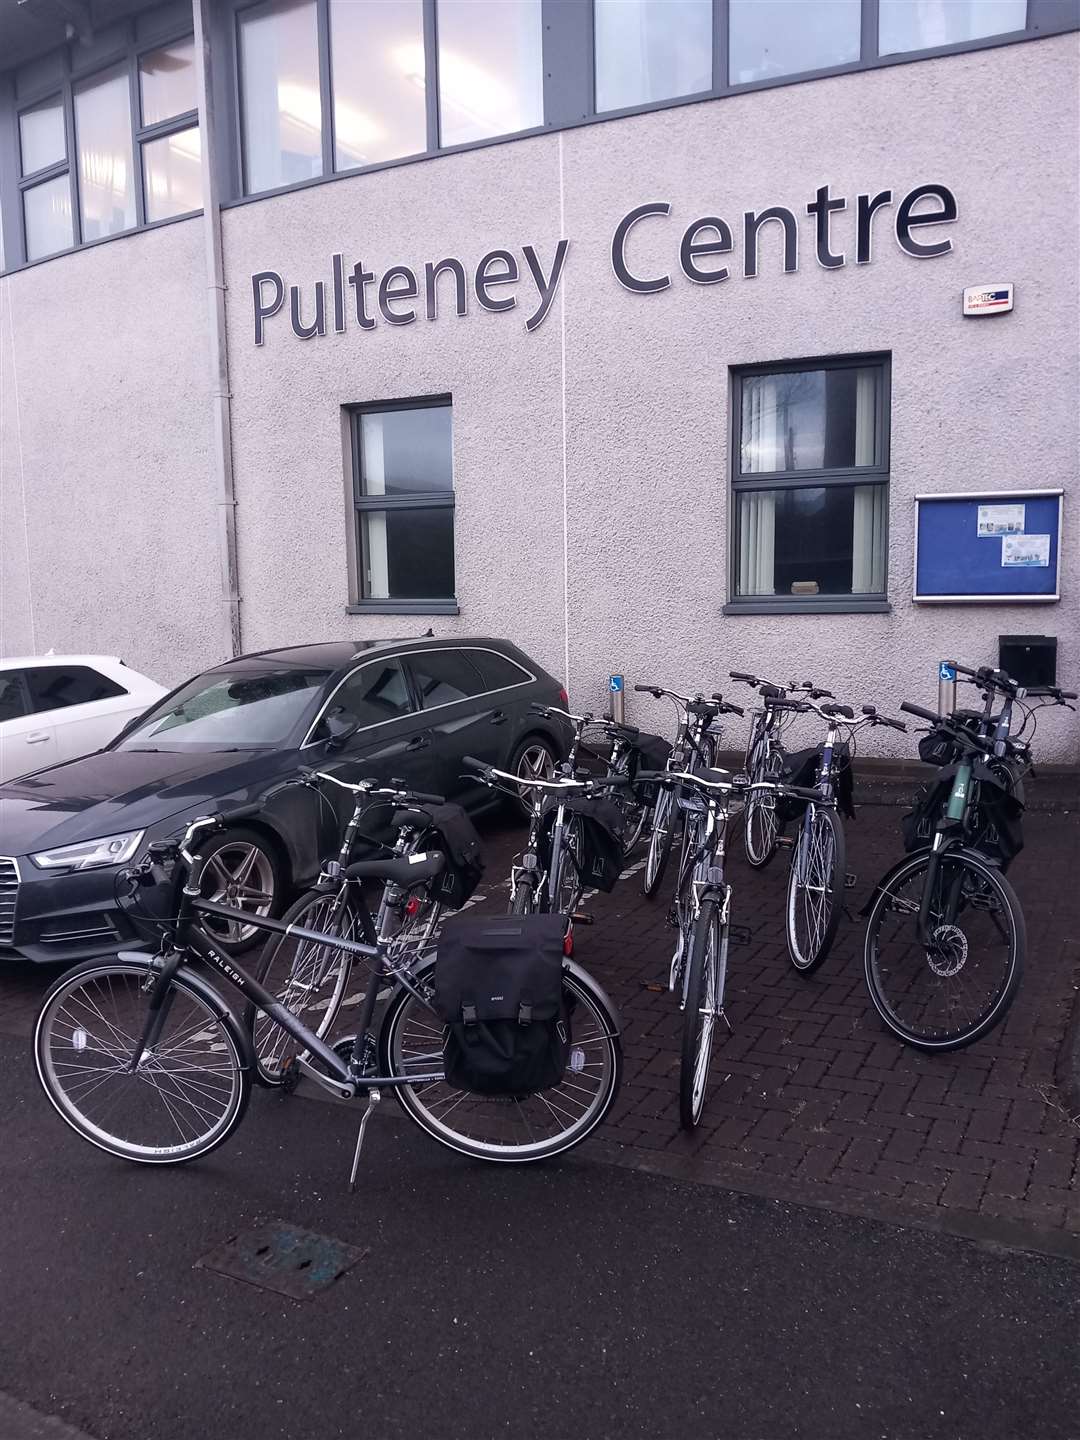 The new bikes at the Pulteney Centre in Wick, home of the PPP.